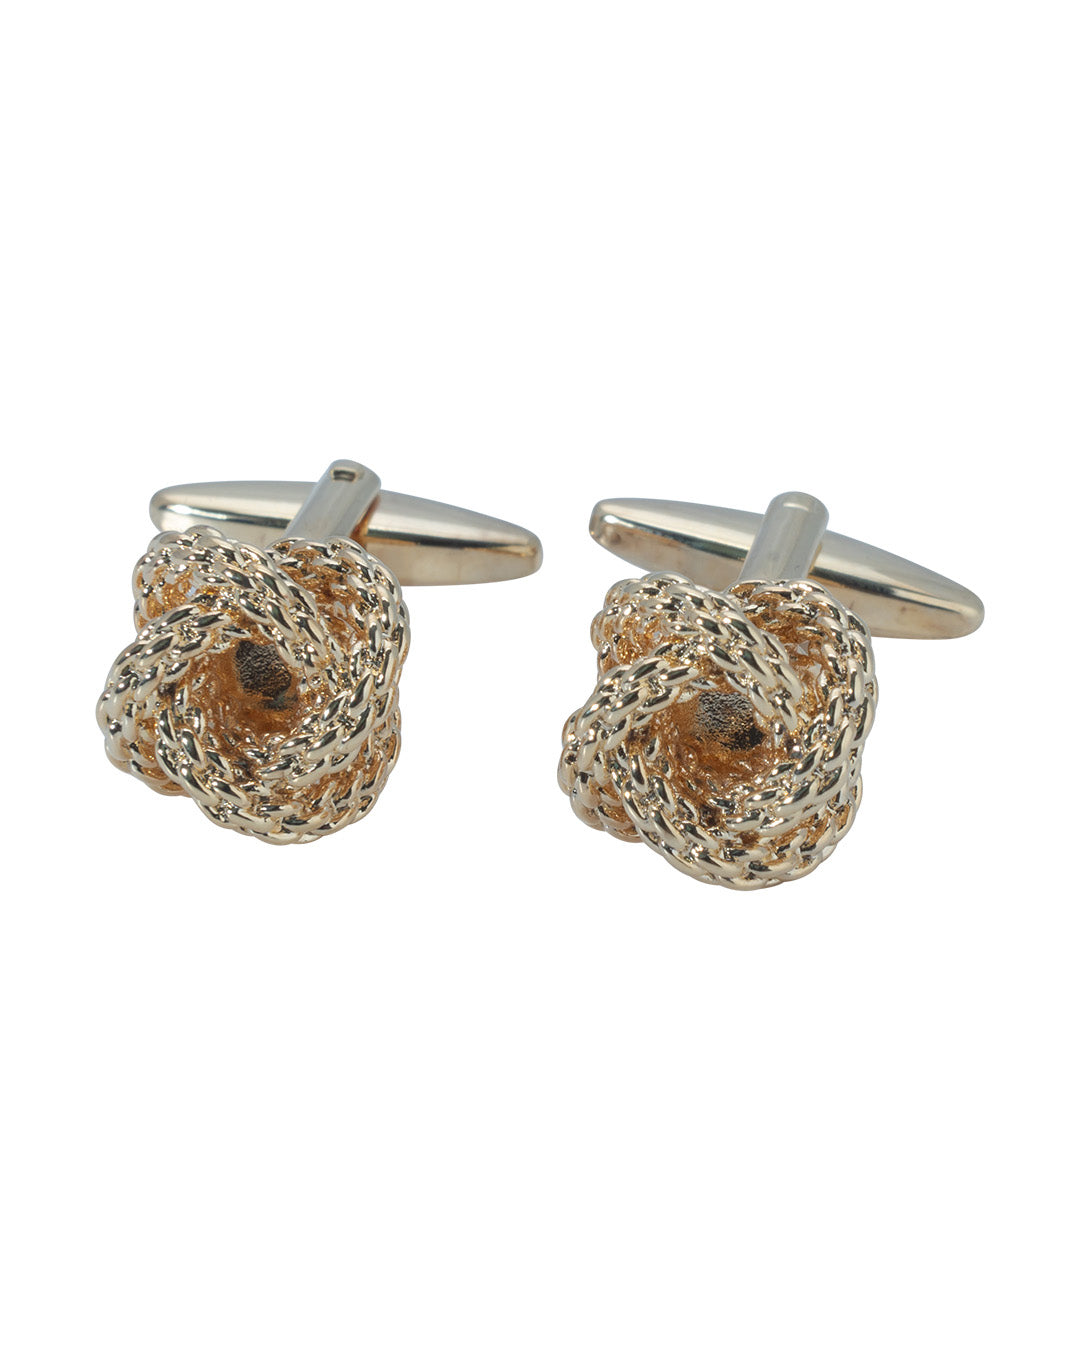 Gold Knotted Rope Cufflinks